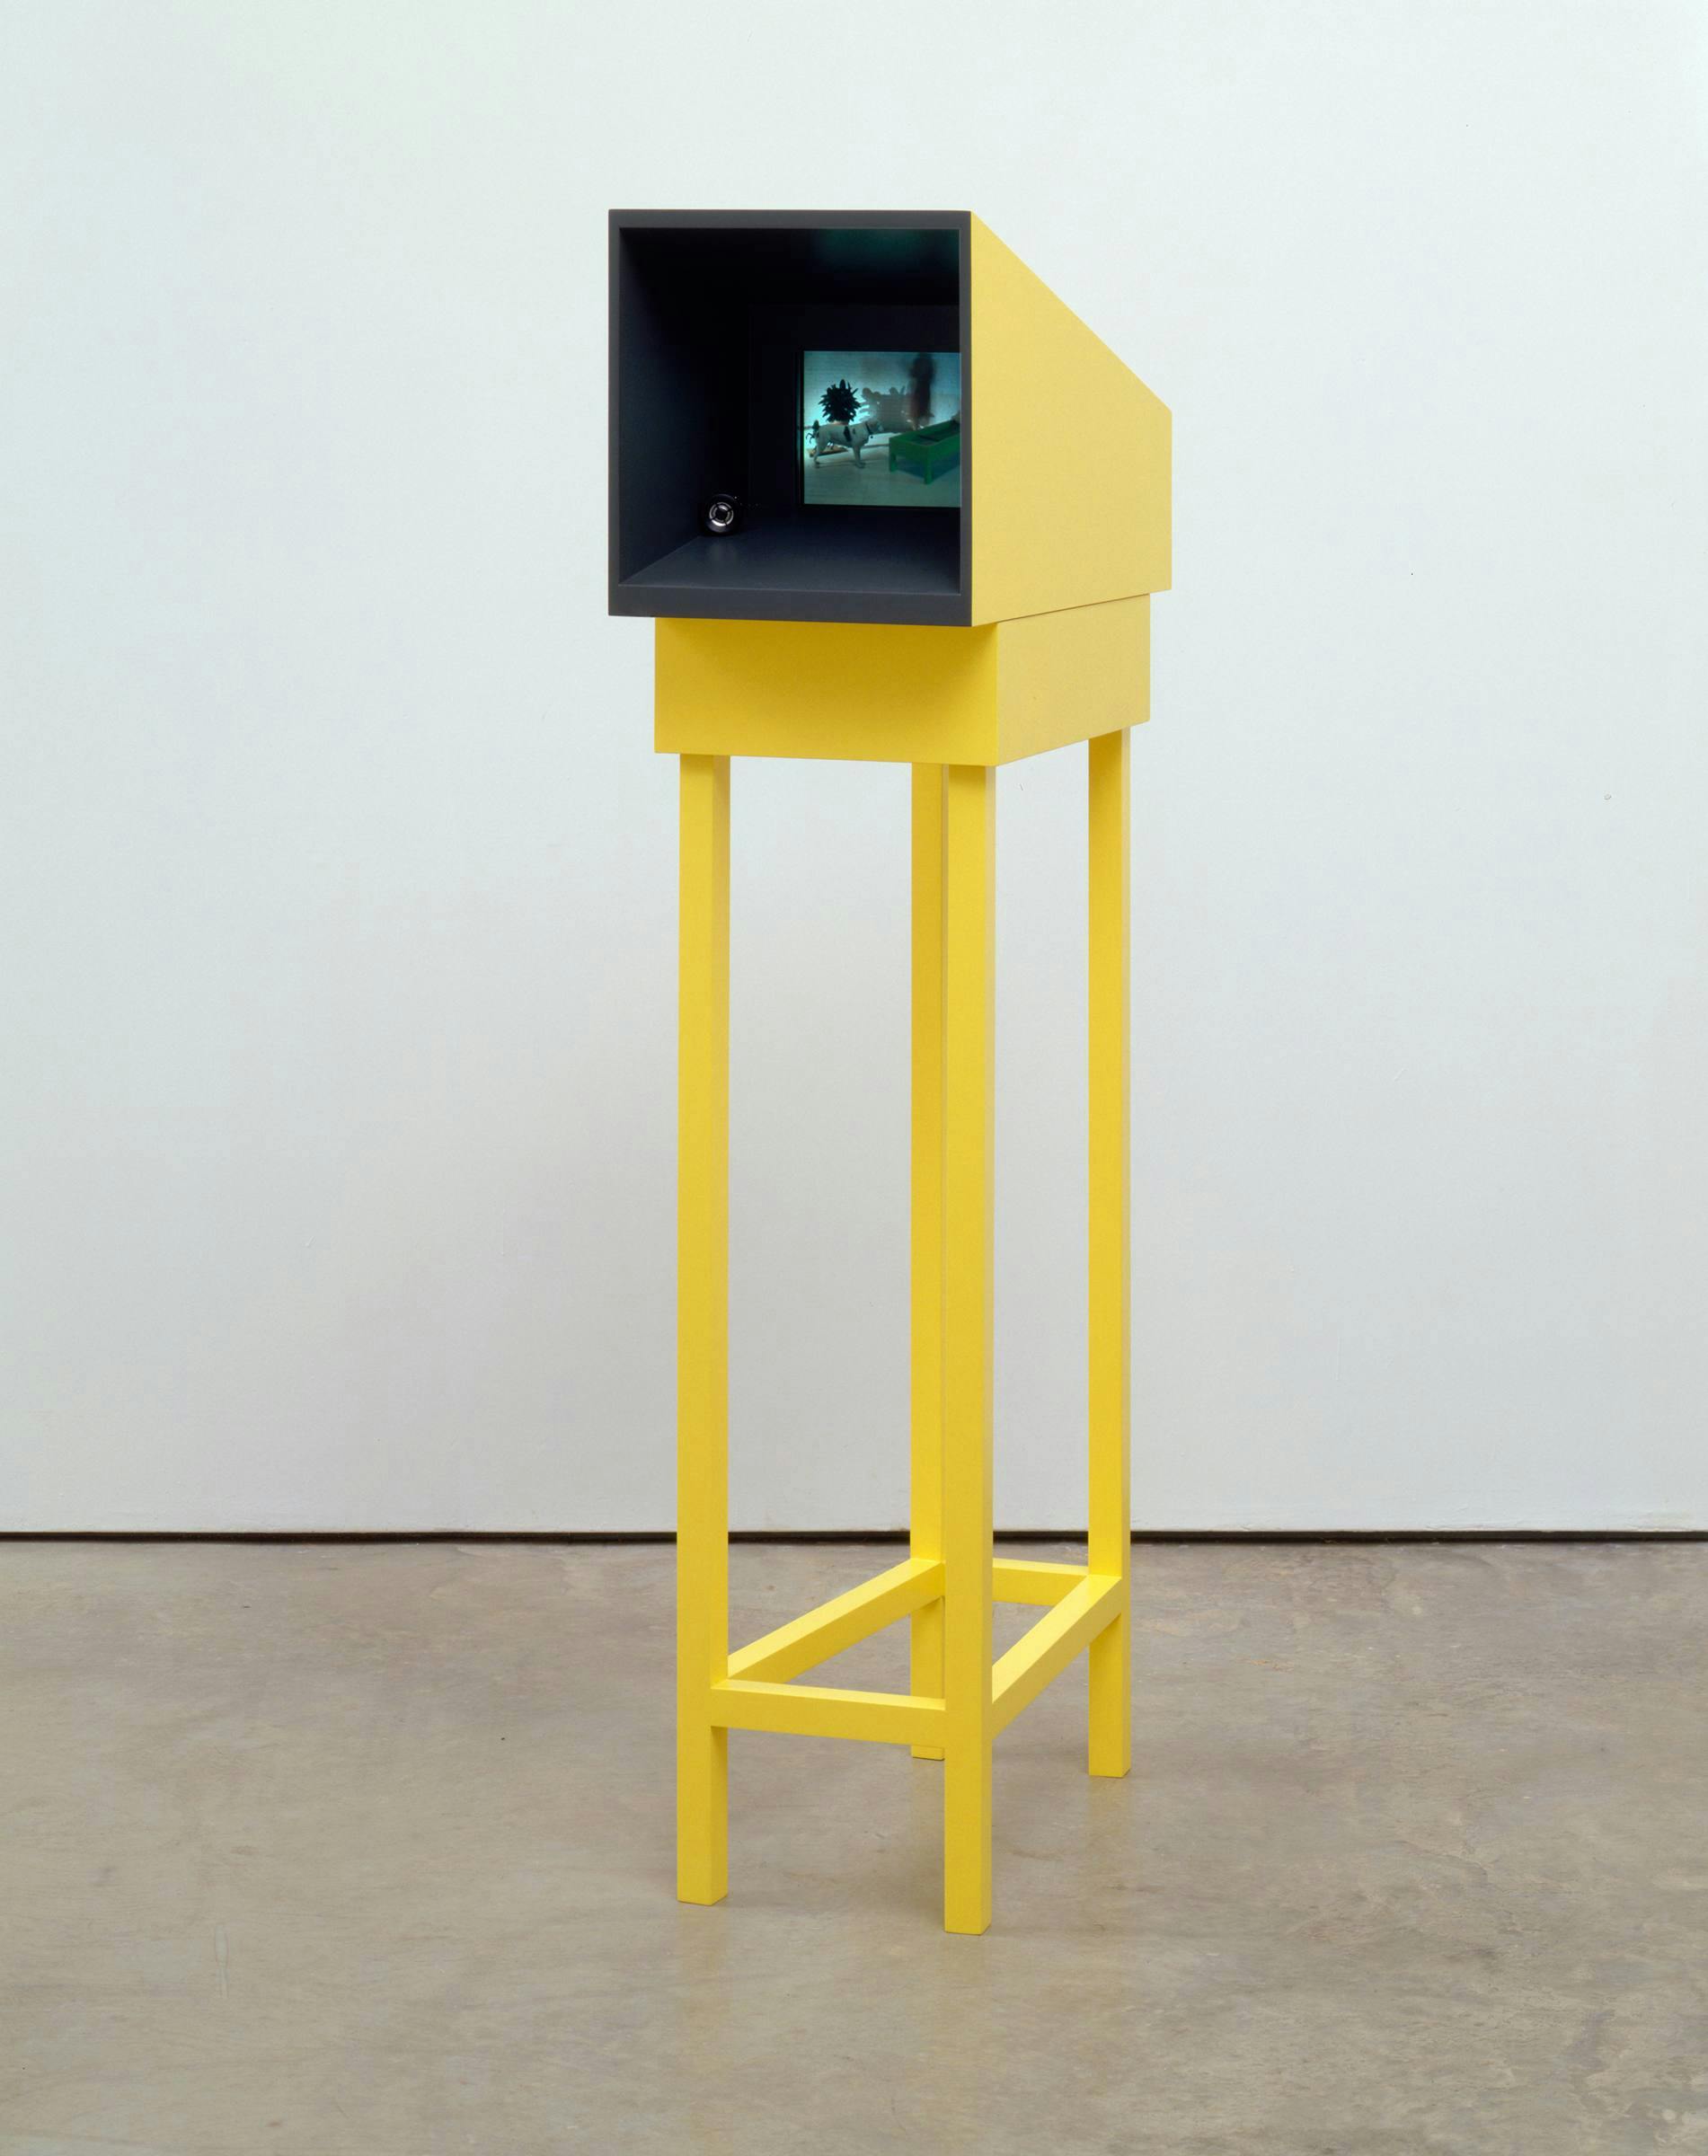 An image of an artwork comprising a yellow projection box on a wooden yellow frame. We can see a film projected inside the box